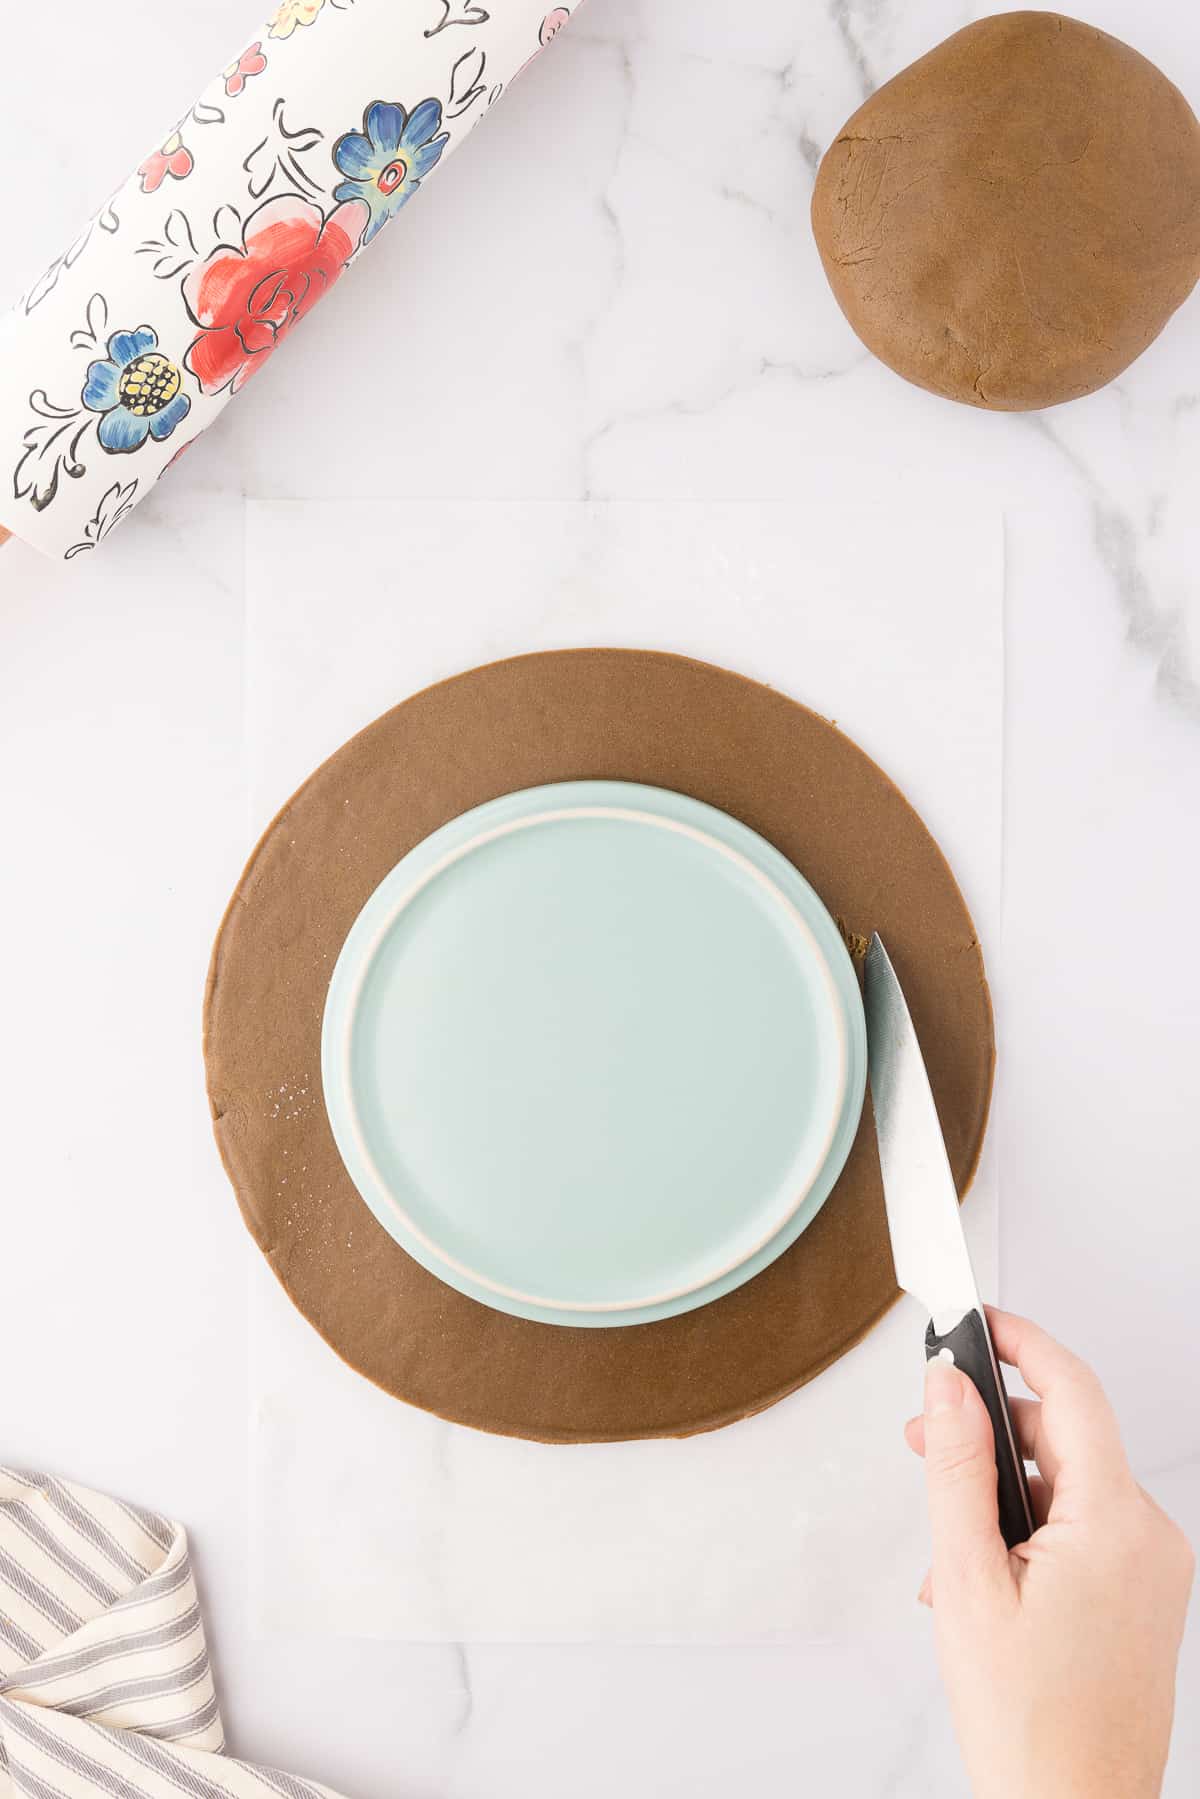 Taking a smaller plate and cutting around it to create a wreath shape.